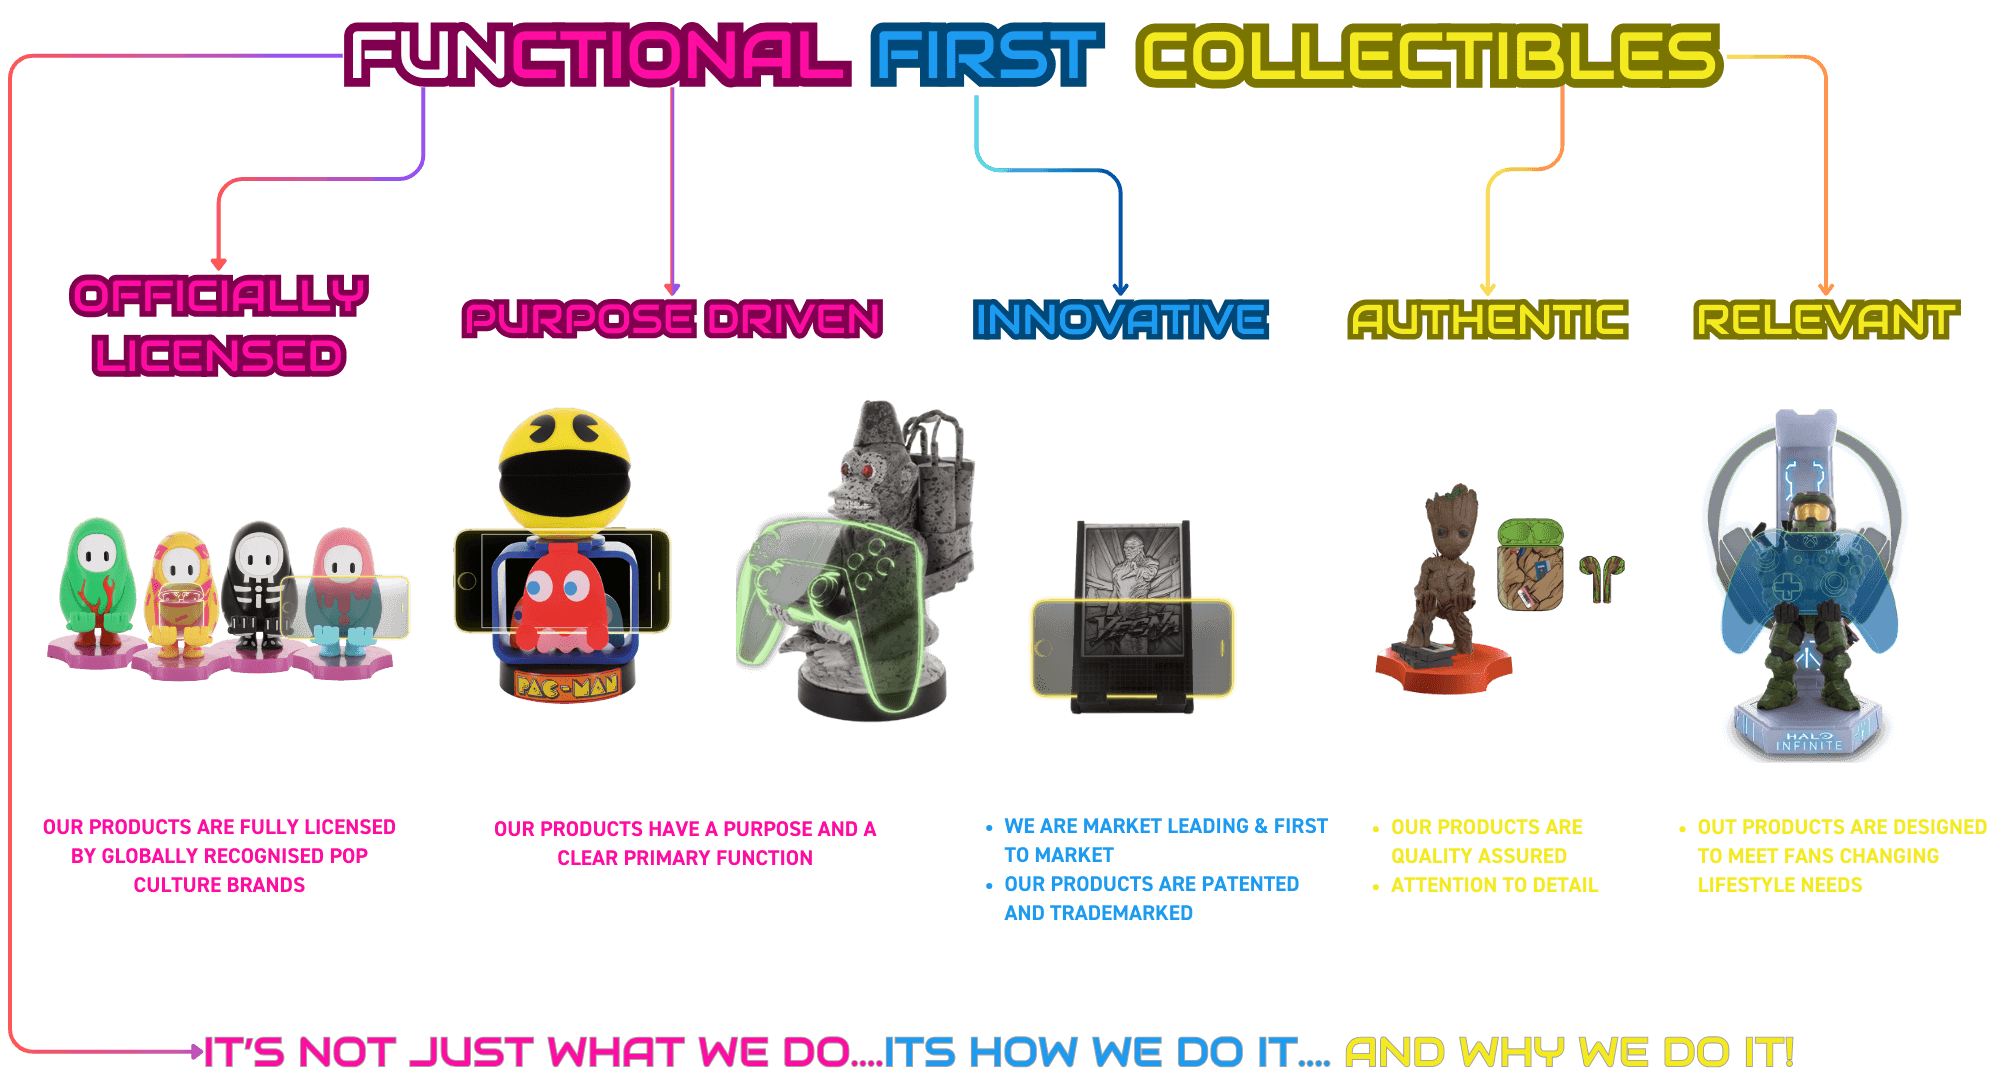 FUNctional First Collectibles AF (1) (1).png__PID:20d7ae61-323c-42db-99c0-f698f26443a9